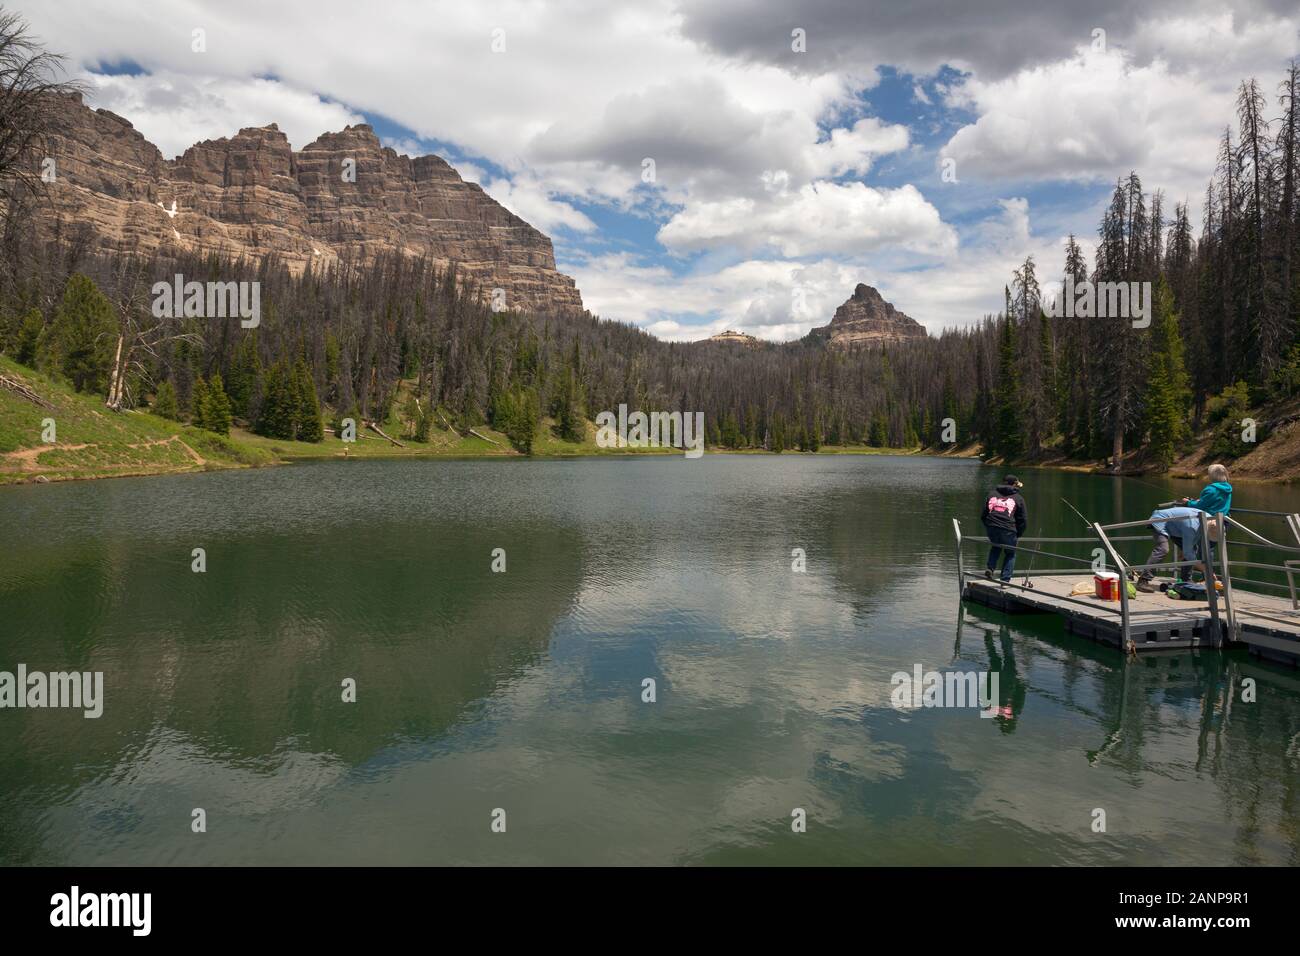 WY03974-00...WYOMING - Family fishing on the dock at the Wind River Lake Picnic Area located in the Bridger-Teton National Forest near Togwotee Pass. Stock Photo